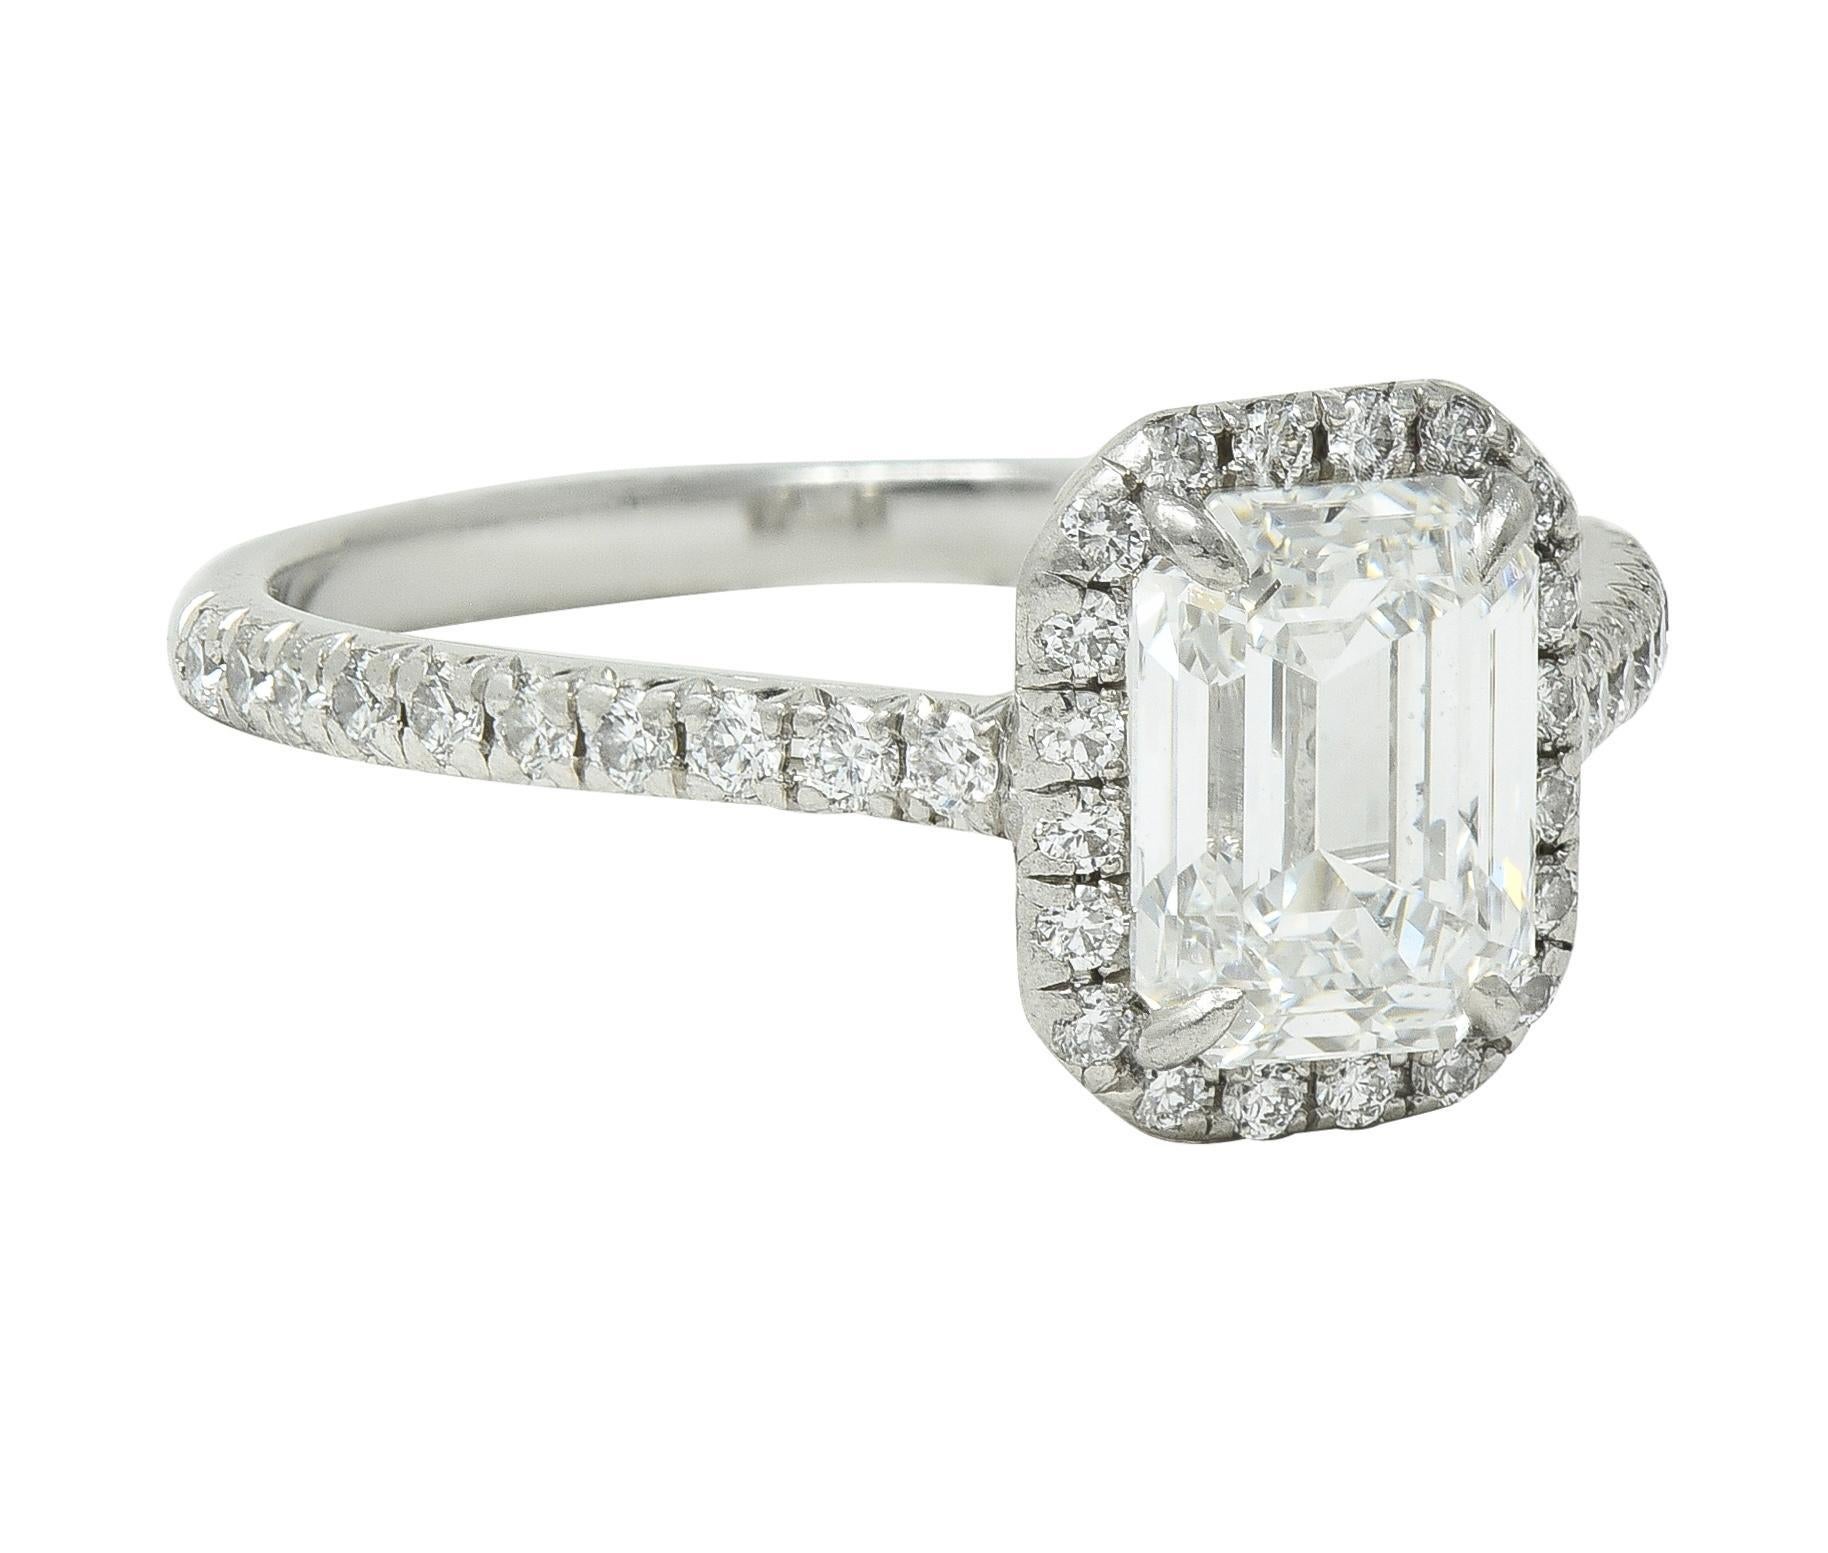 Centering an emerald cut diamond weighing 1.32 carats - F color with VS2 clarity
Prong set with a halo surround of prong set round brilliant cut diamonds
With additional diamonds prong set down the shoulders
Weighing approximately 0.27 carat total -